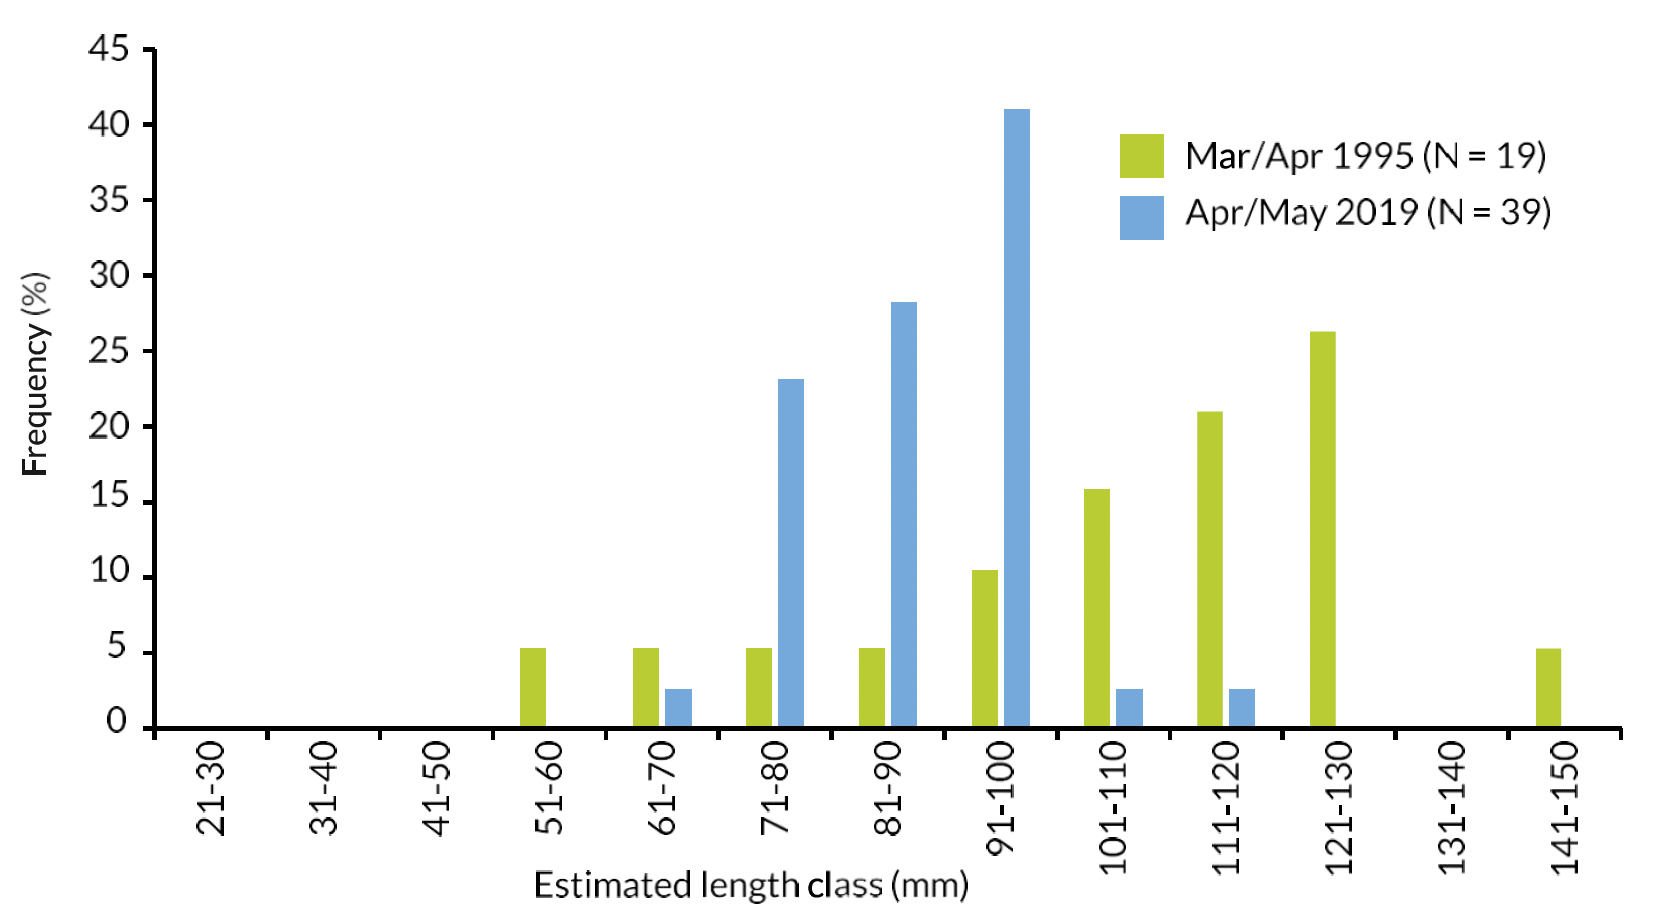 Bar chart of estimated Salmon length frequency distribution from the stomach contents of River Tweed Cormorants: smolt run sample period 2019 and another broadly comparable sample